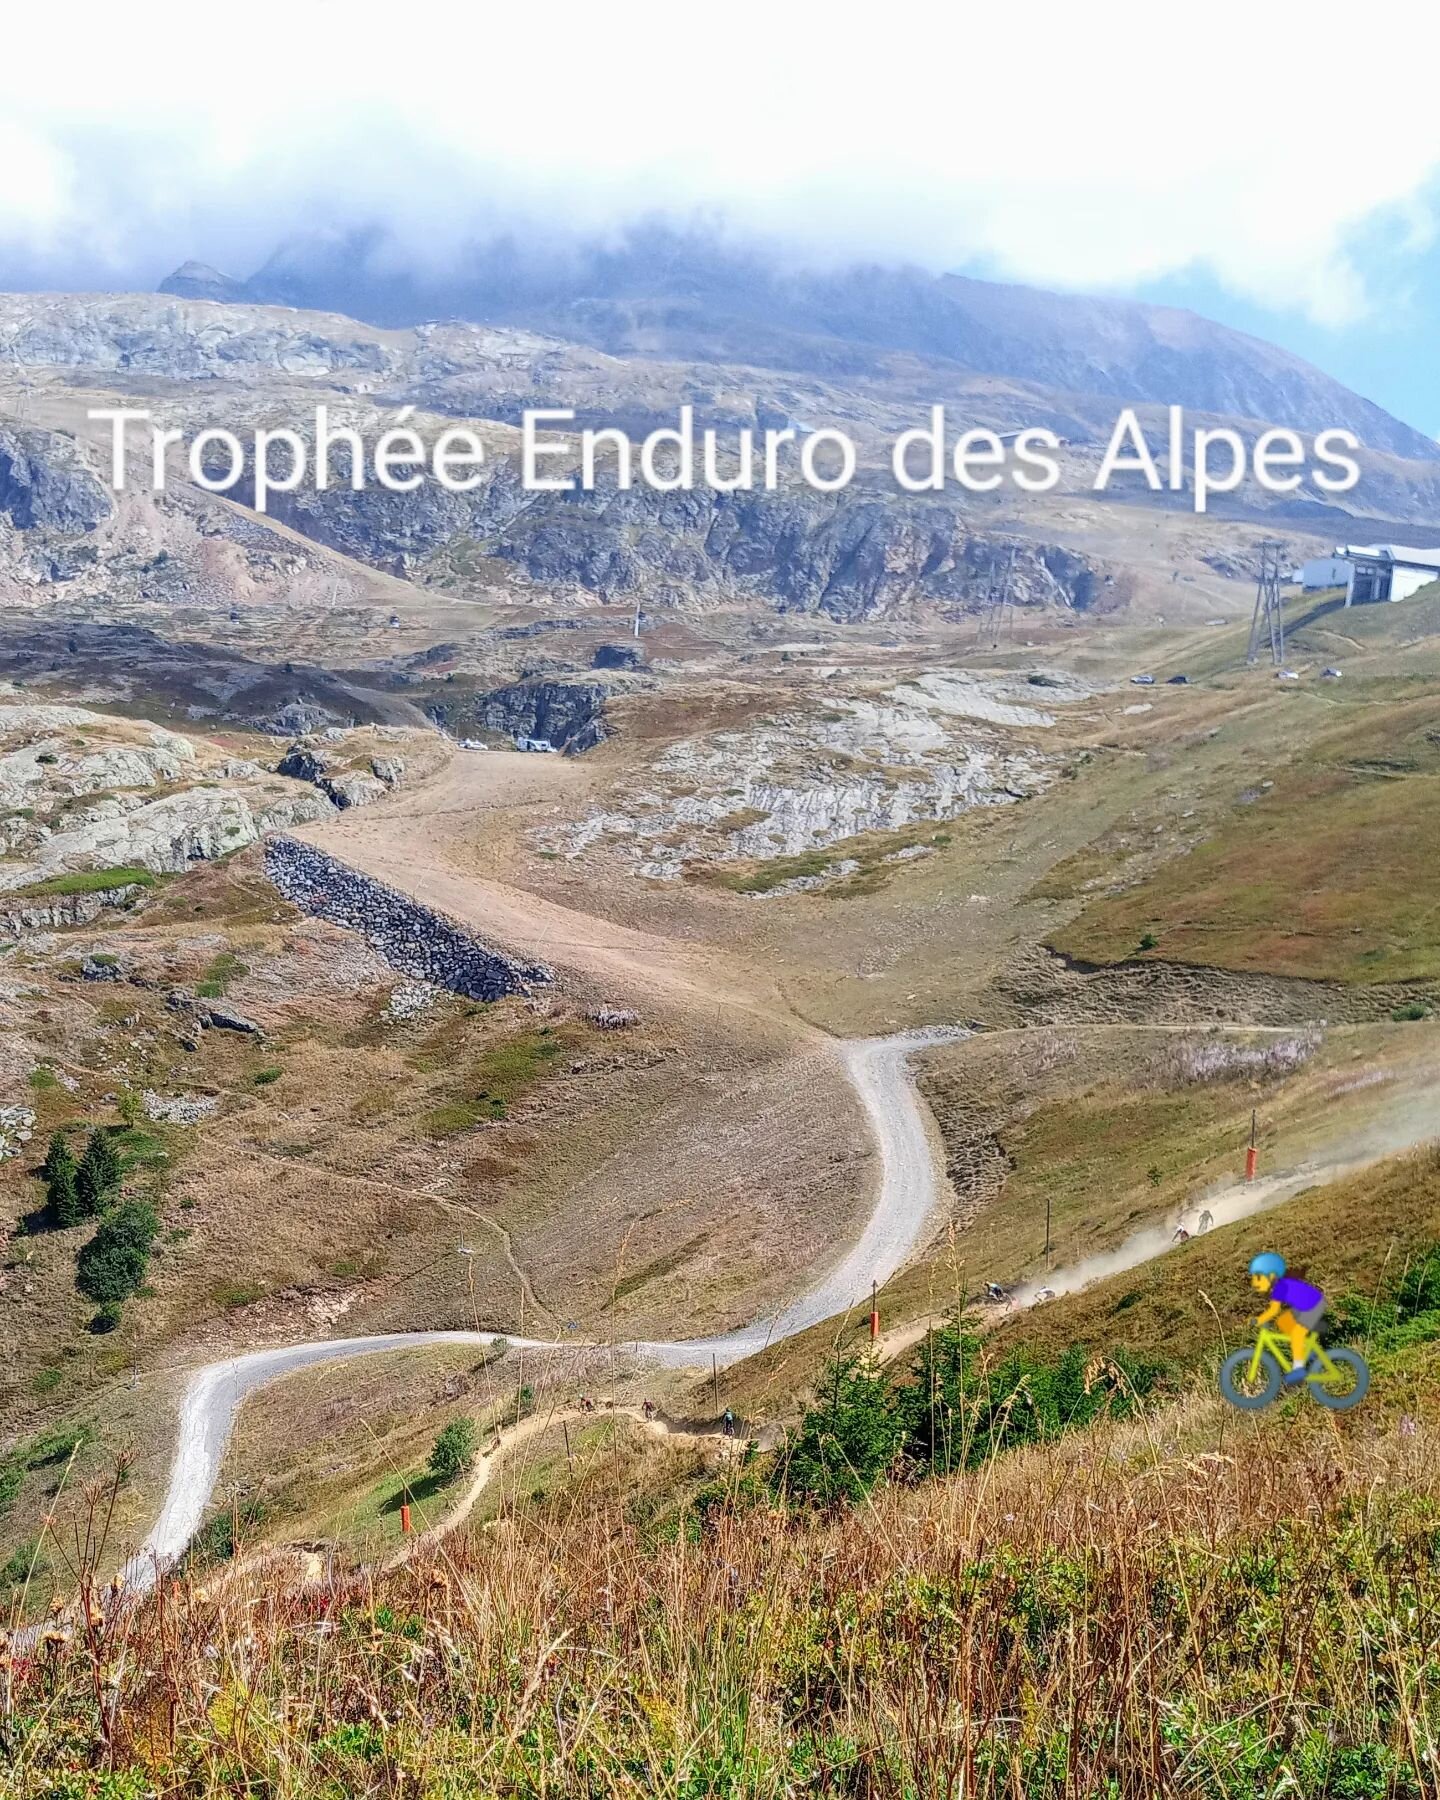 Troph&eacute;e Enduro des Alpes

MTB Enduro Race. Fast, dusty trails . What a day to finish off the summer lift season. 
It's been emotional! 
Bring on the snow. 

alpexpress@alpexpress.net

#tropheeendurodesalpes 
#oz 
#vaujany 
#alpesdhuez 
#summer